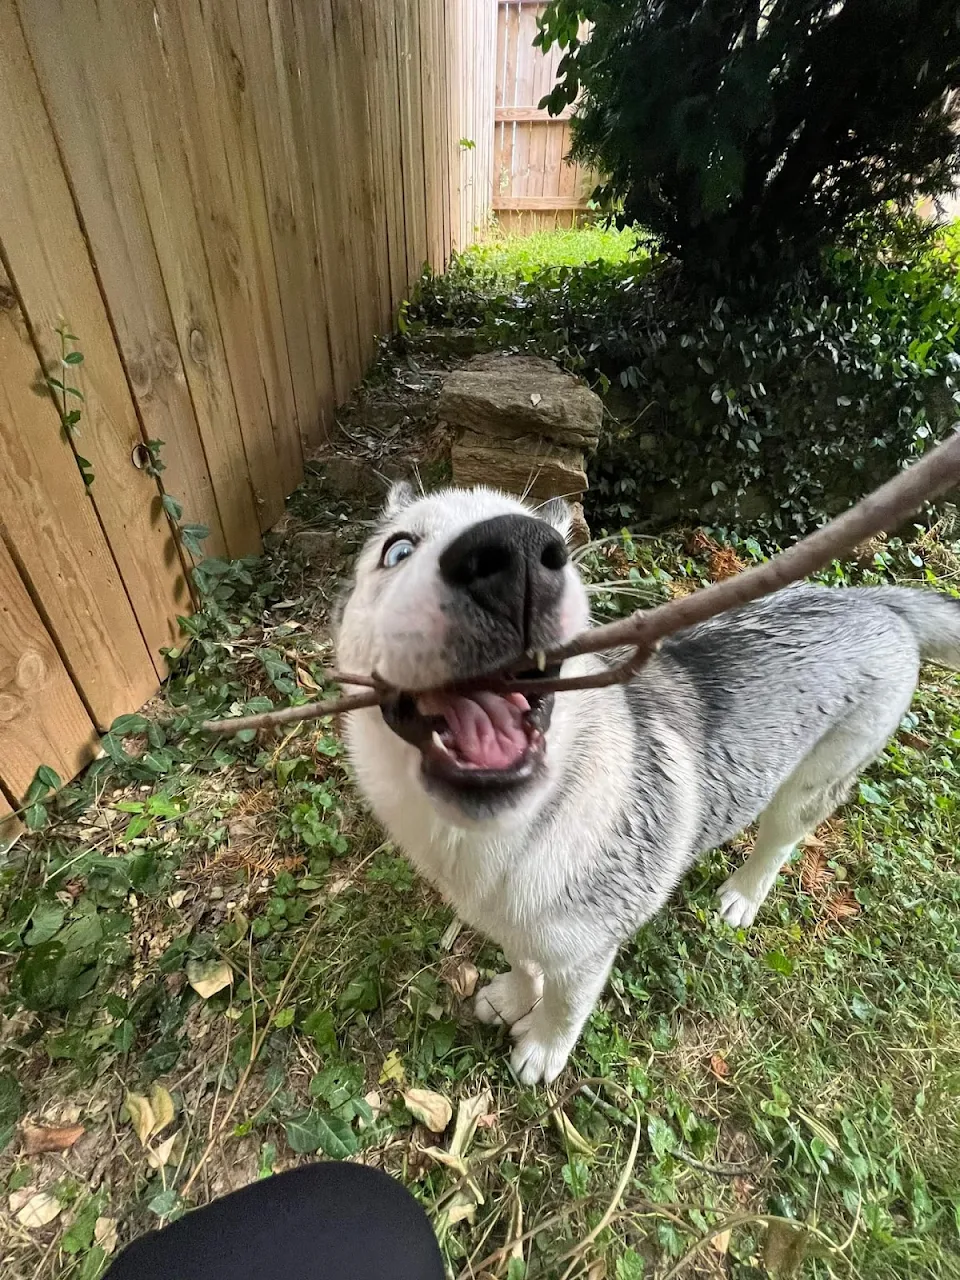 She's very proud of her stick!